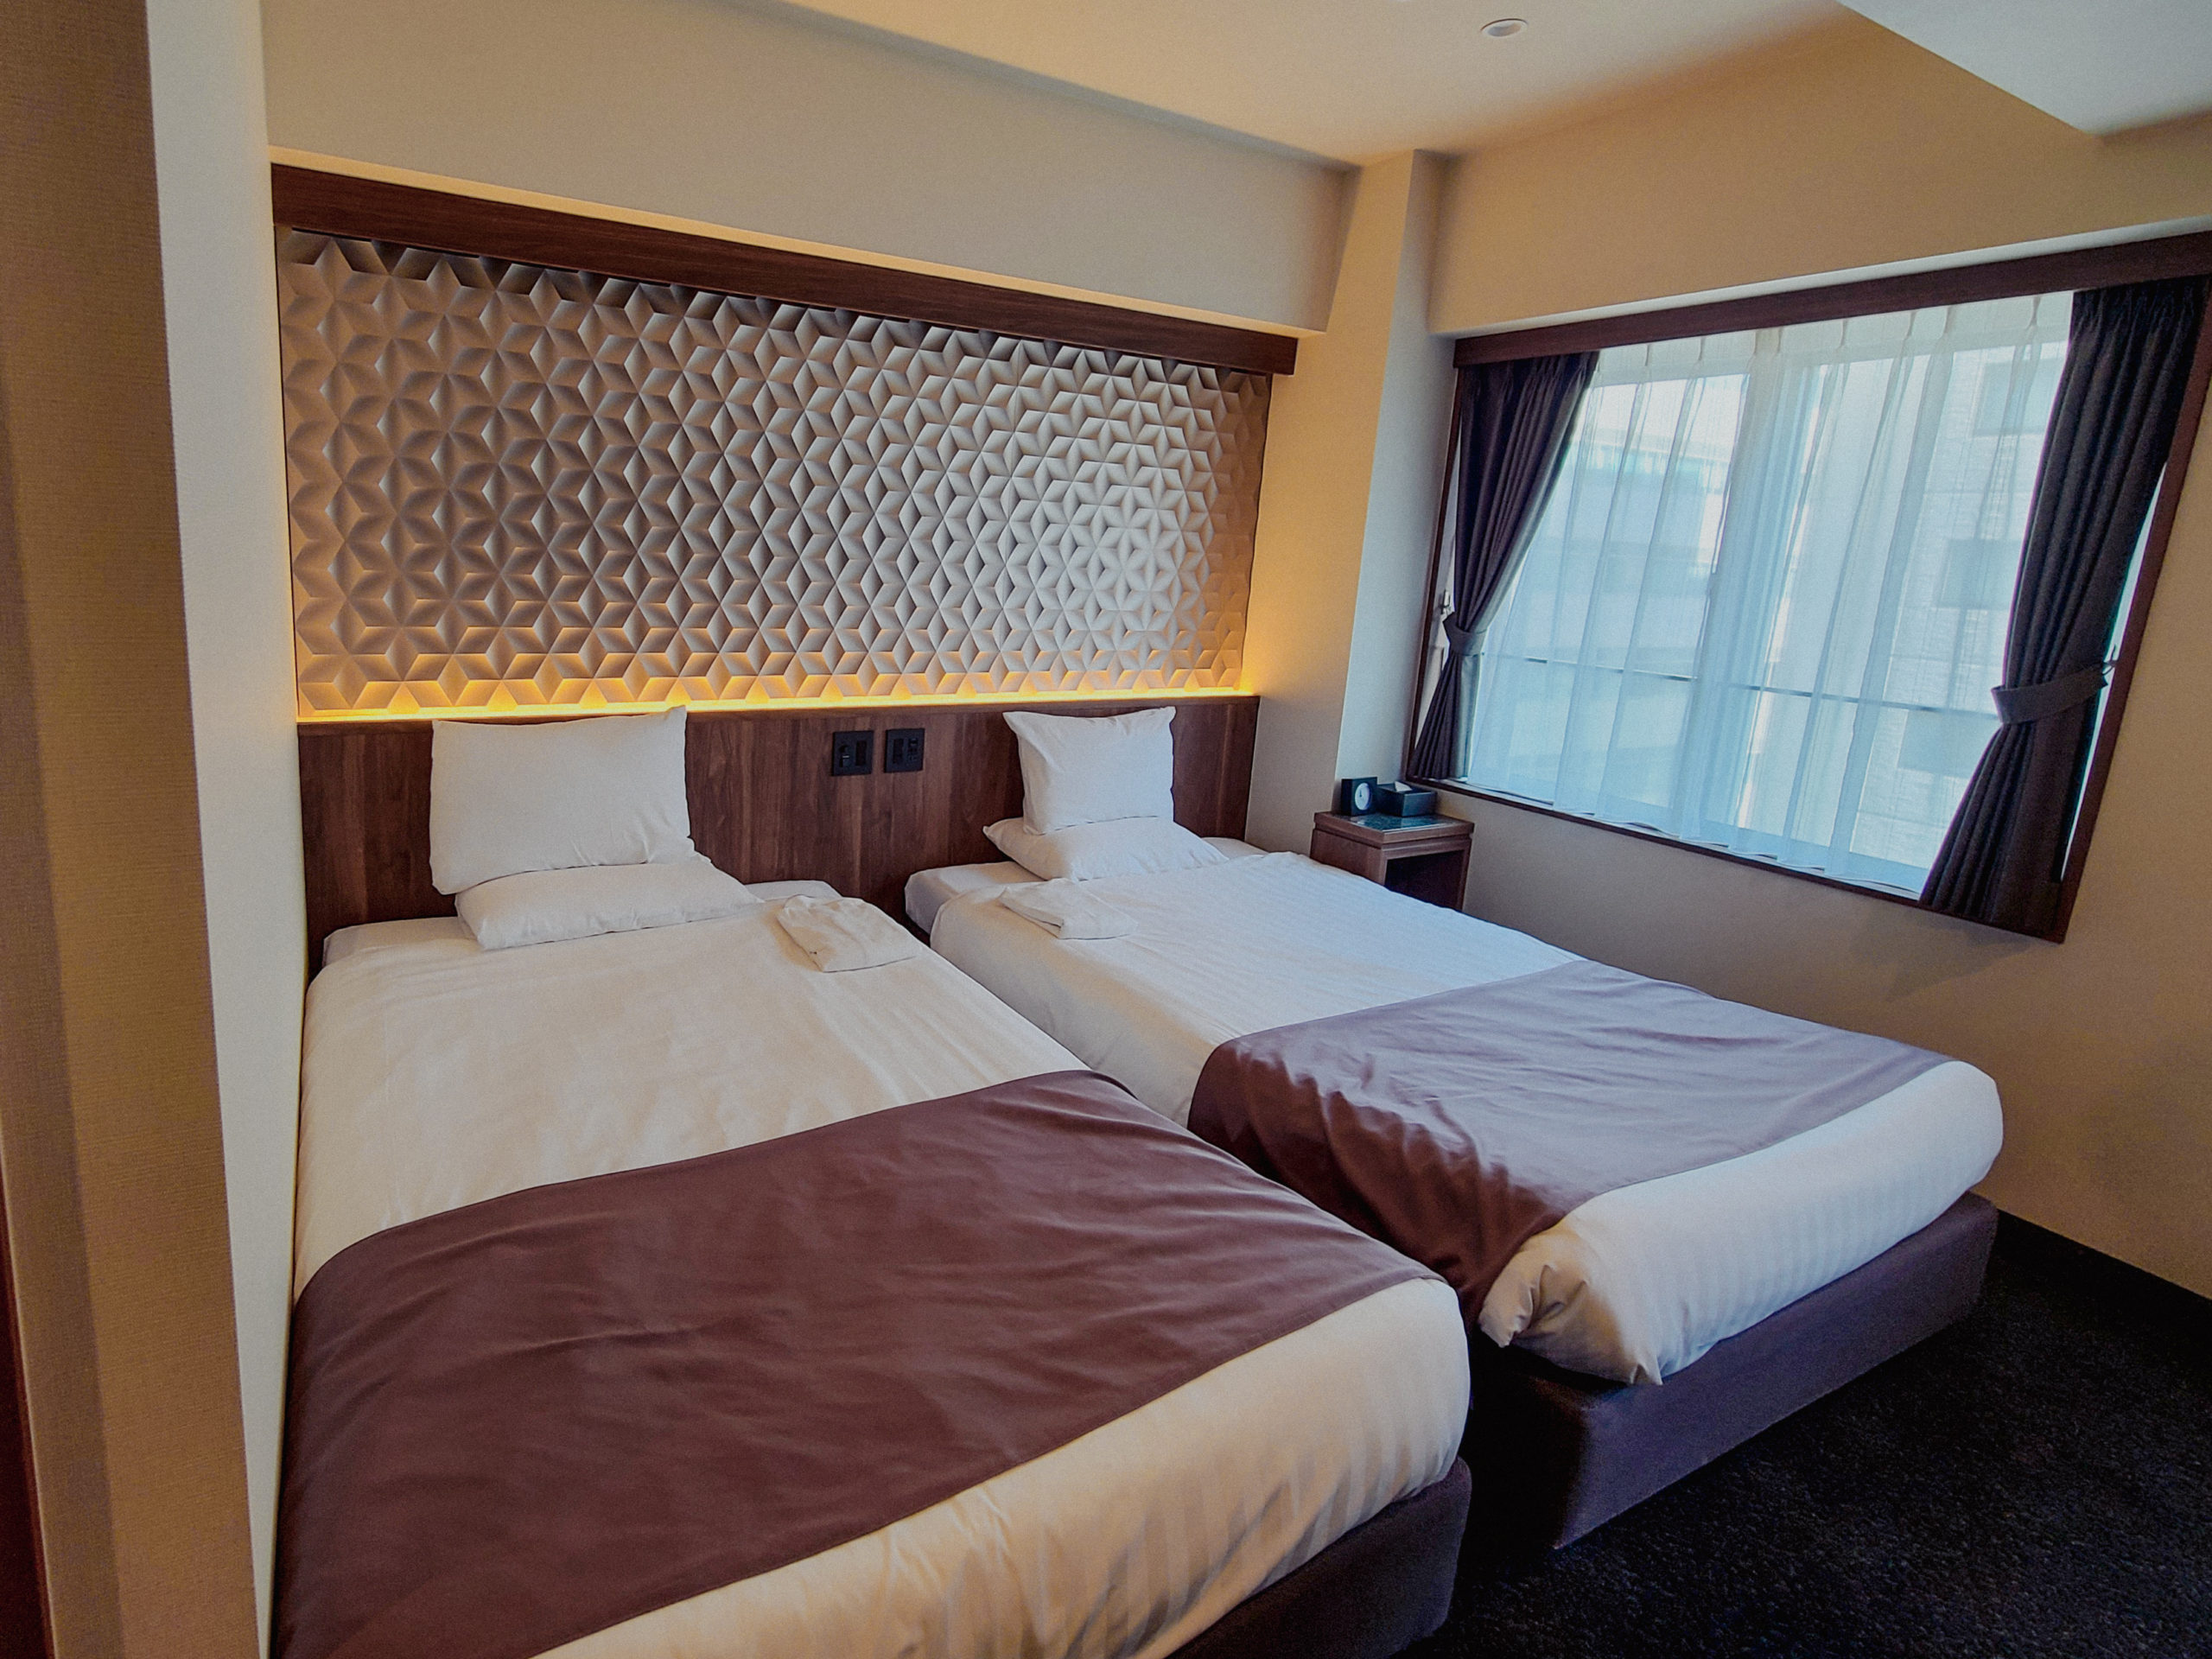 A third of the rooms are even able to connect to your smartphone so that you can watch Netflix or YouTube on the large screen TV.